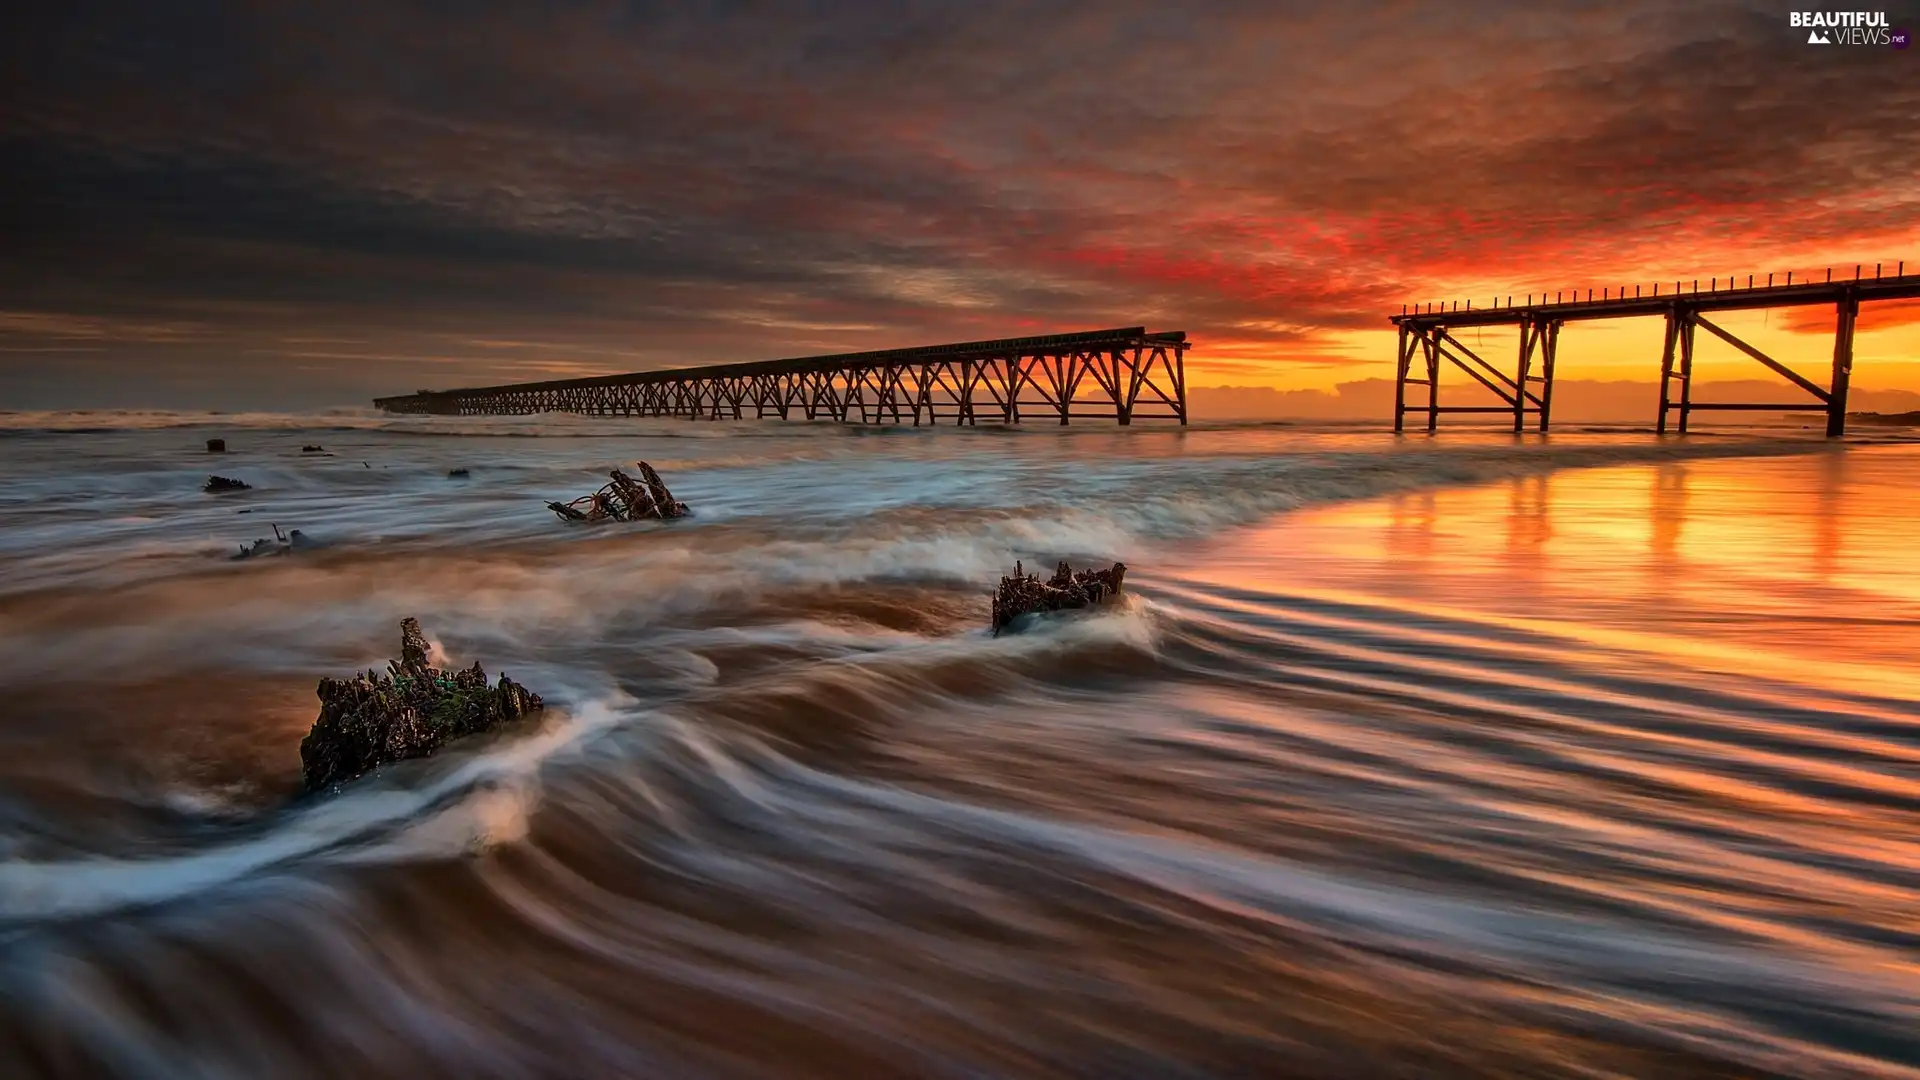 Steetley Pier, Durham County, Great Sunsets, City Hartlepool, England, North Sea, clouds